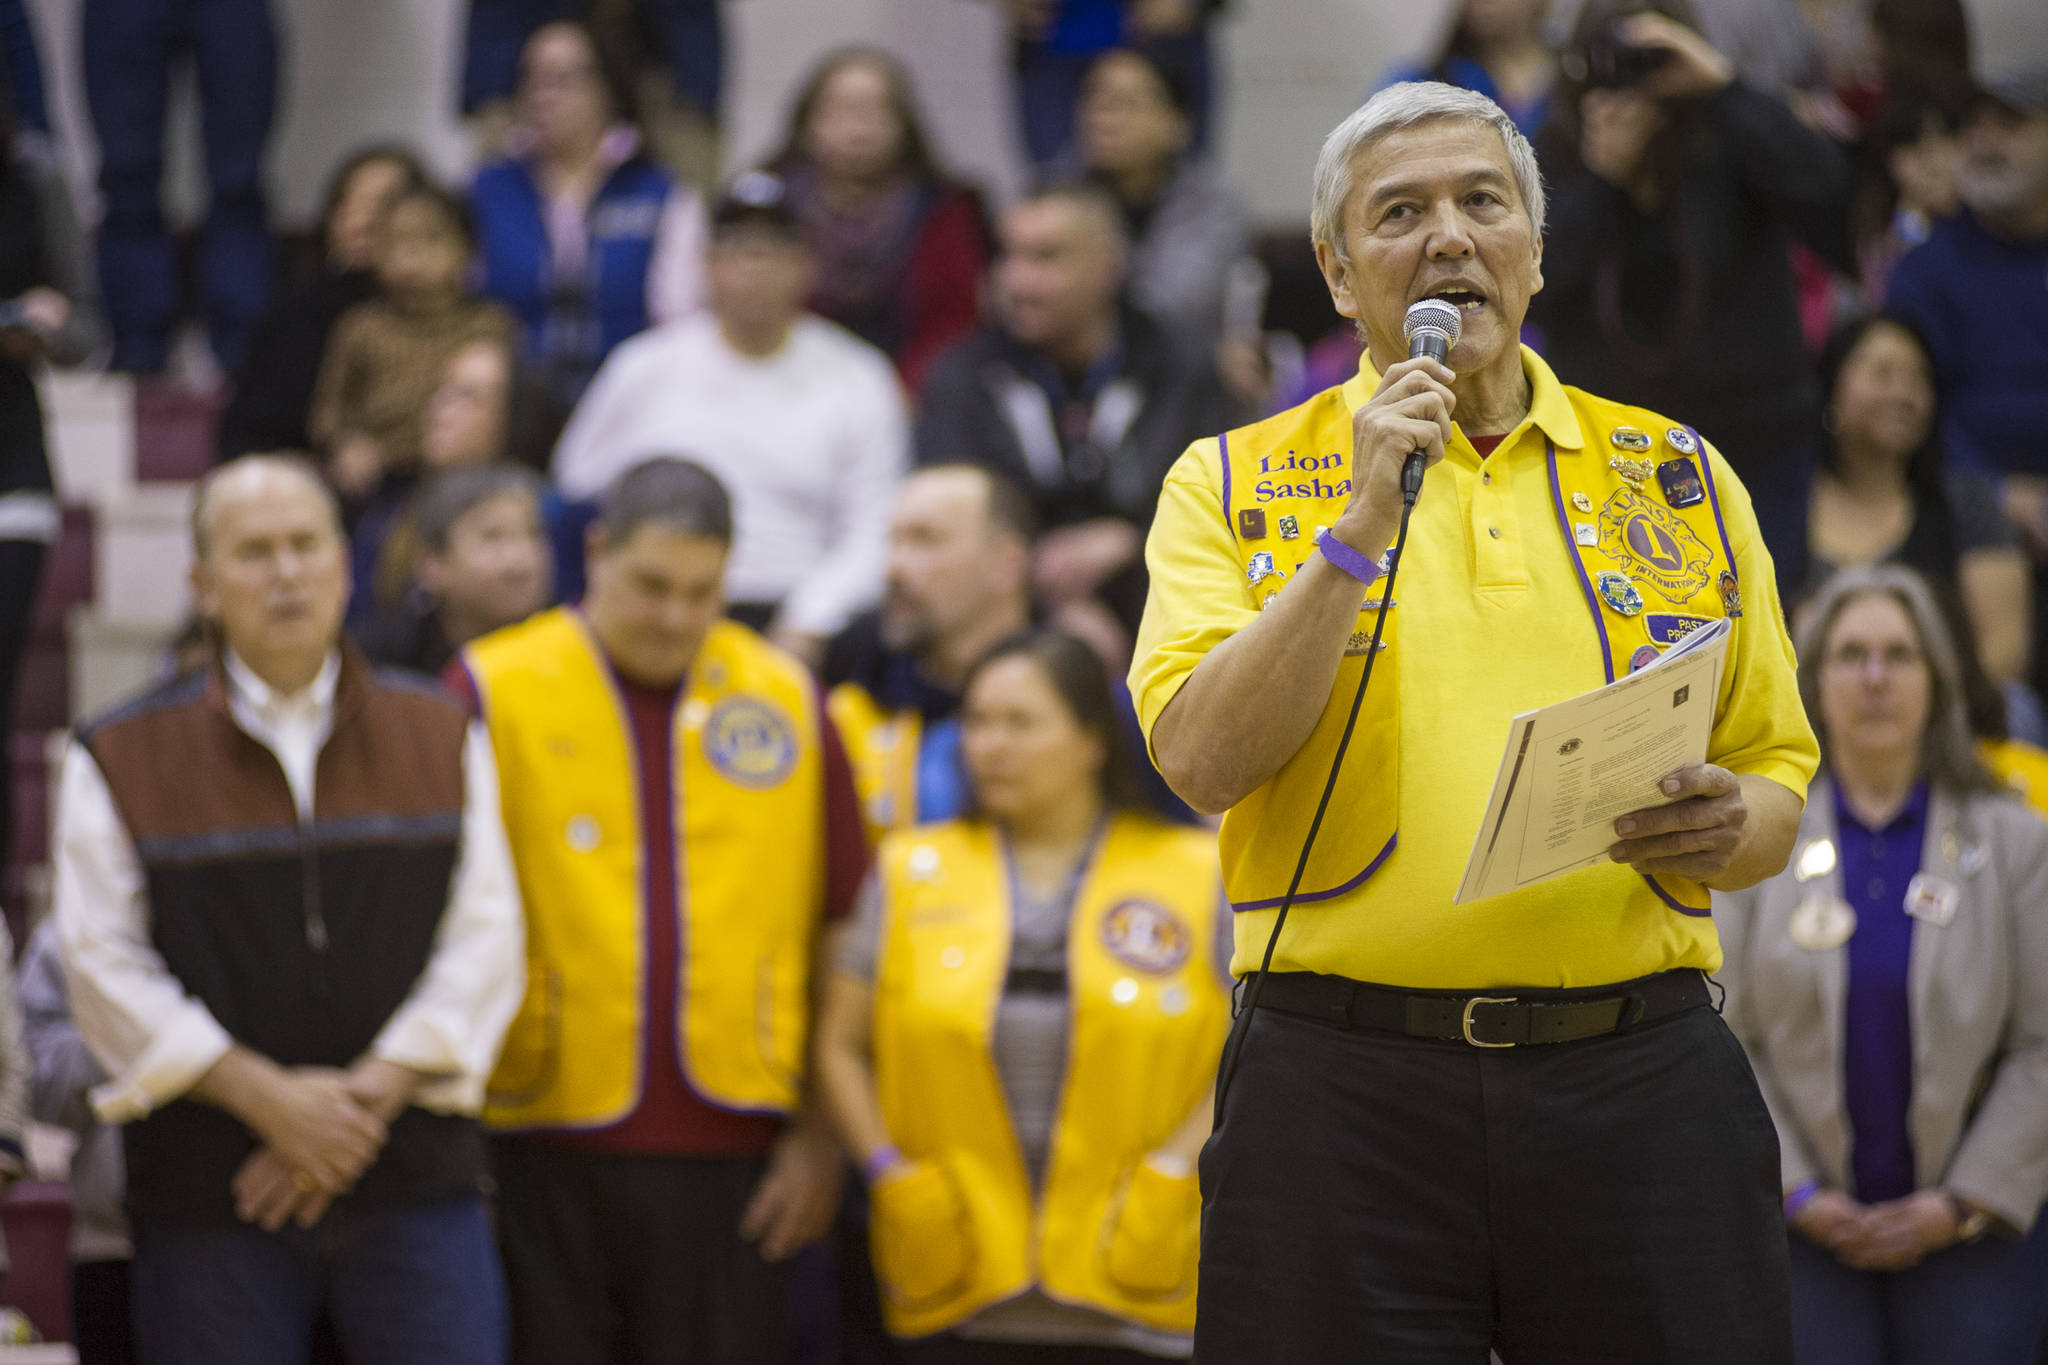 In this March 16, 2015 photo, Sasha Soboleff, past president of the Juneau Lions Club, introduces Gov. Bill Walker, left, during opening ceremonies of the Juneau Lions Club Gold Medal Basketball Tournament at Juneau-Douglas High School. (Michael Penn | Juneau Empire File)